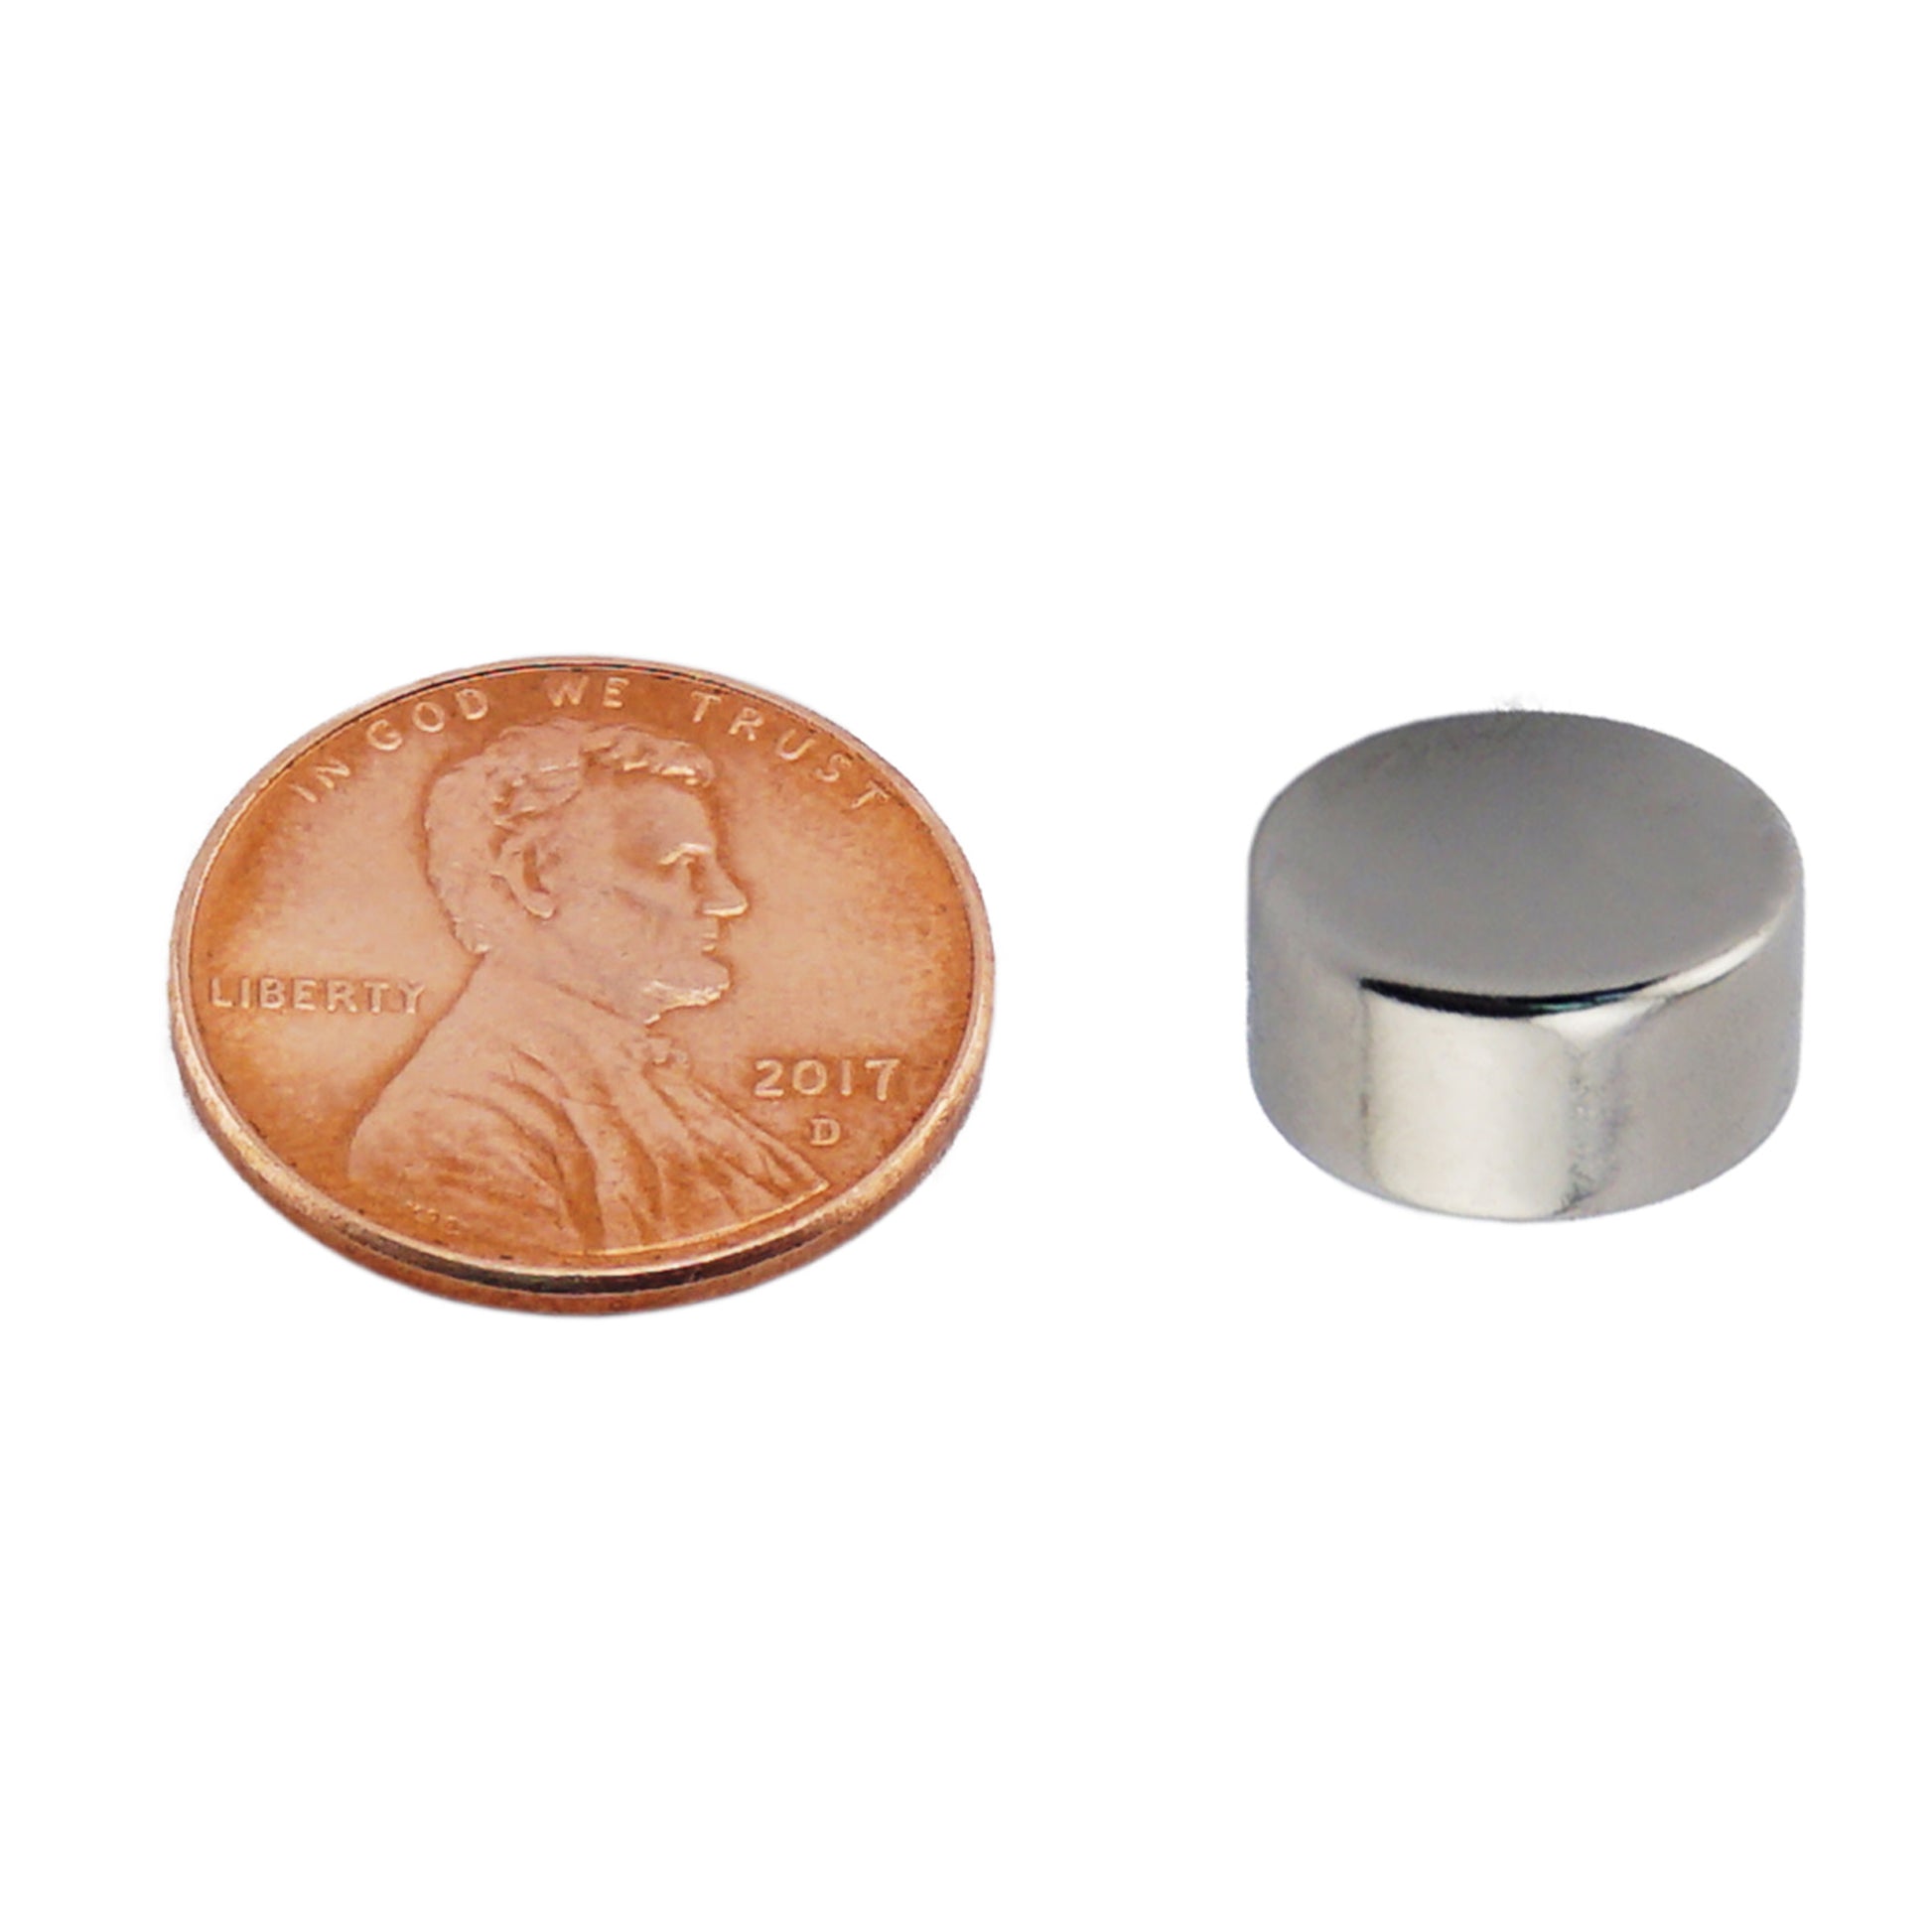 Load image into Gallery viewer, ND005044N Neodymium Disc Magnet - Compared to Penny for Size Reference